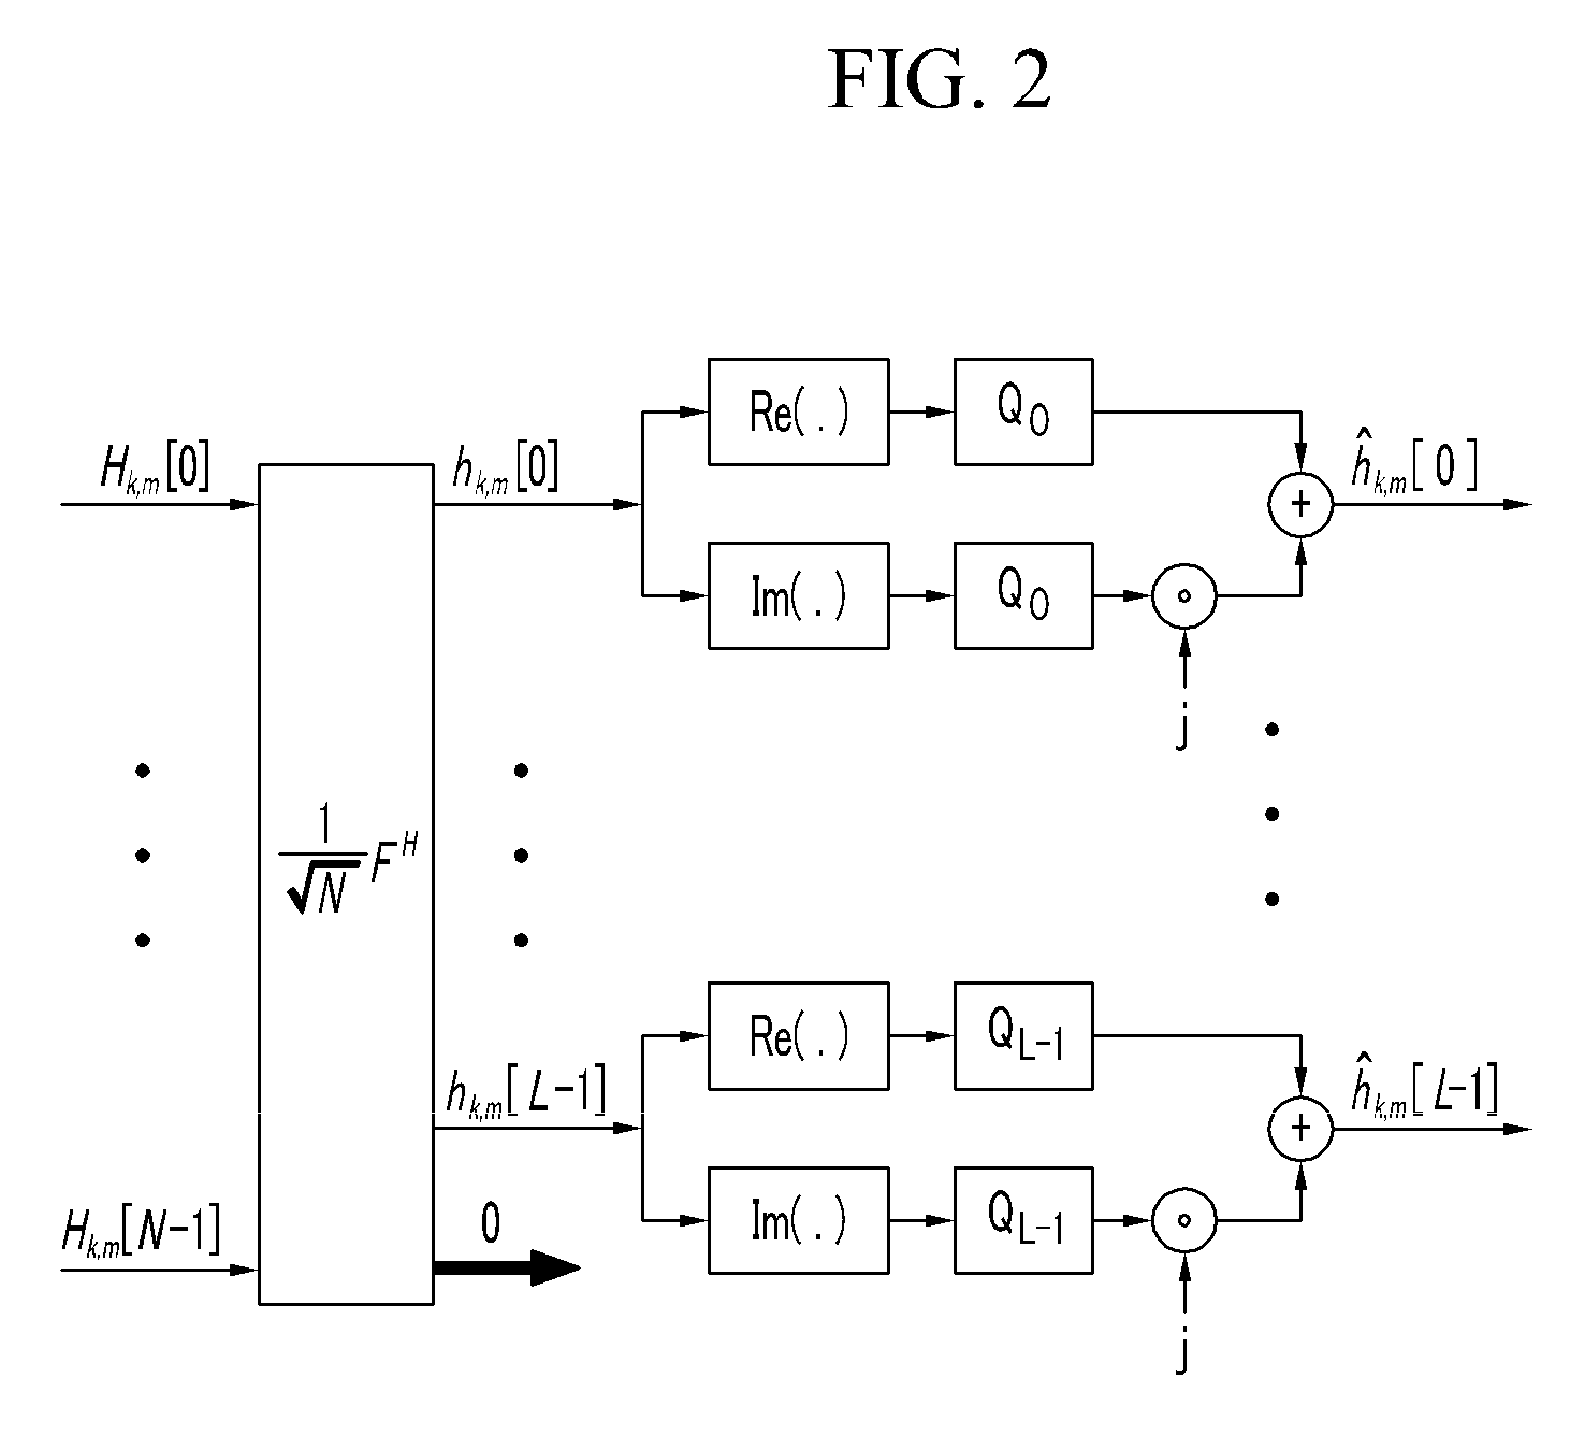 Method for channel state feedback by quantization of time-domain coefficients